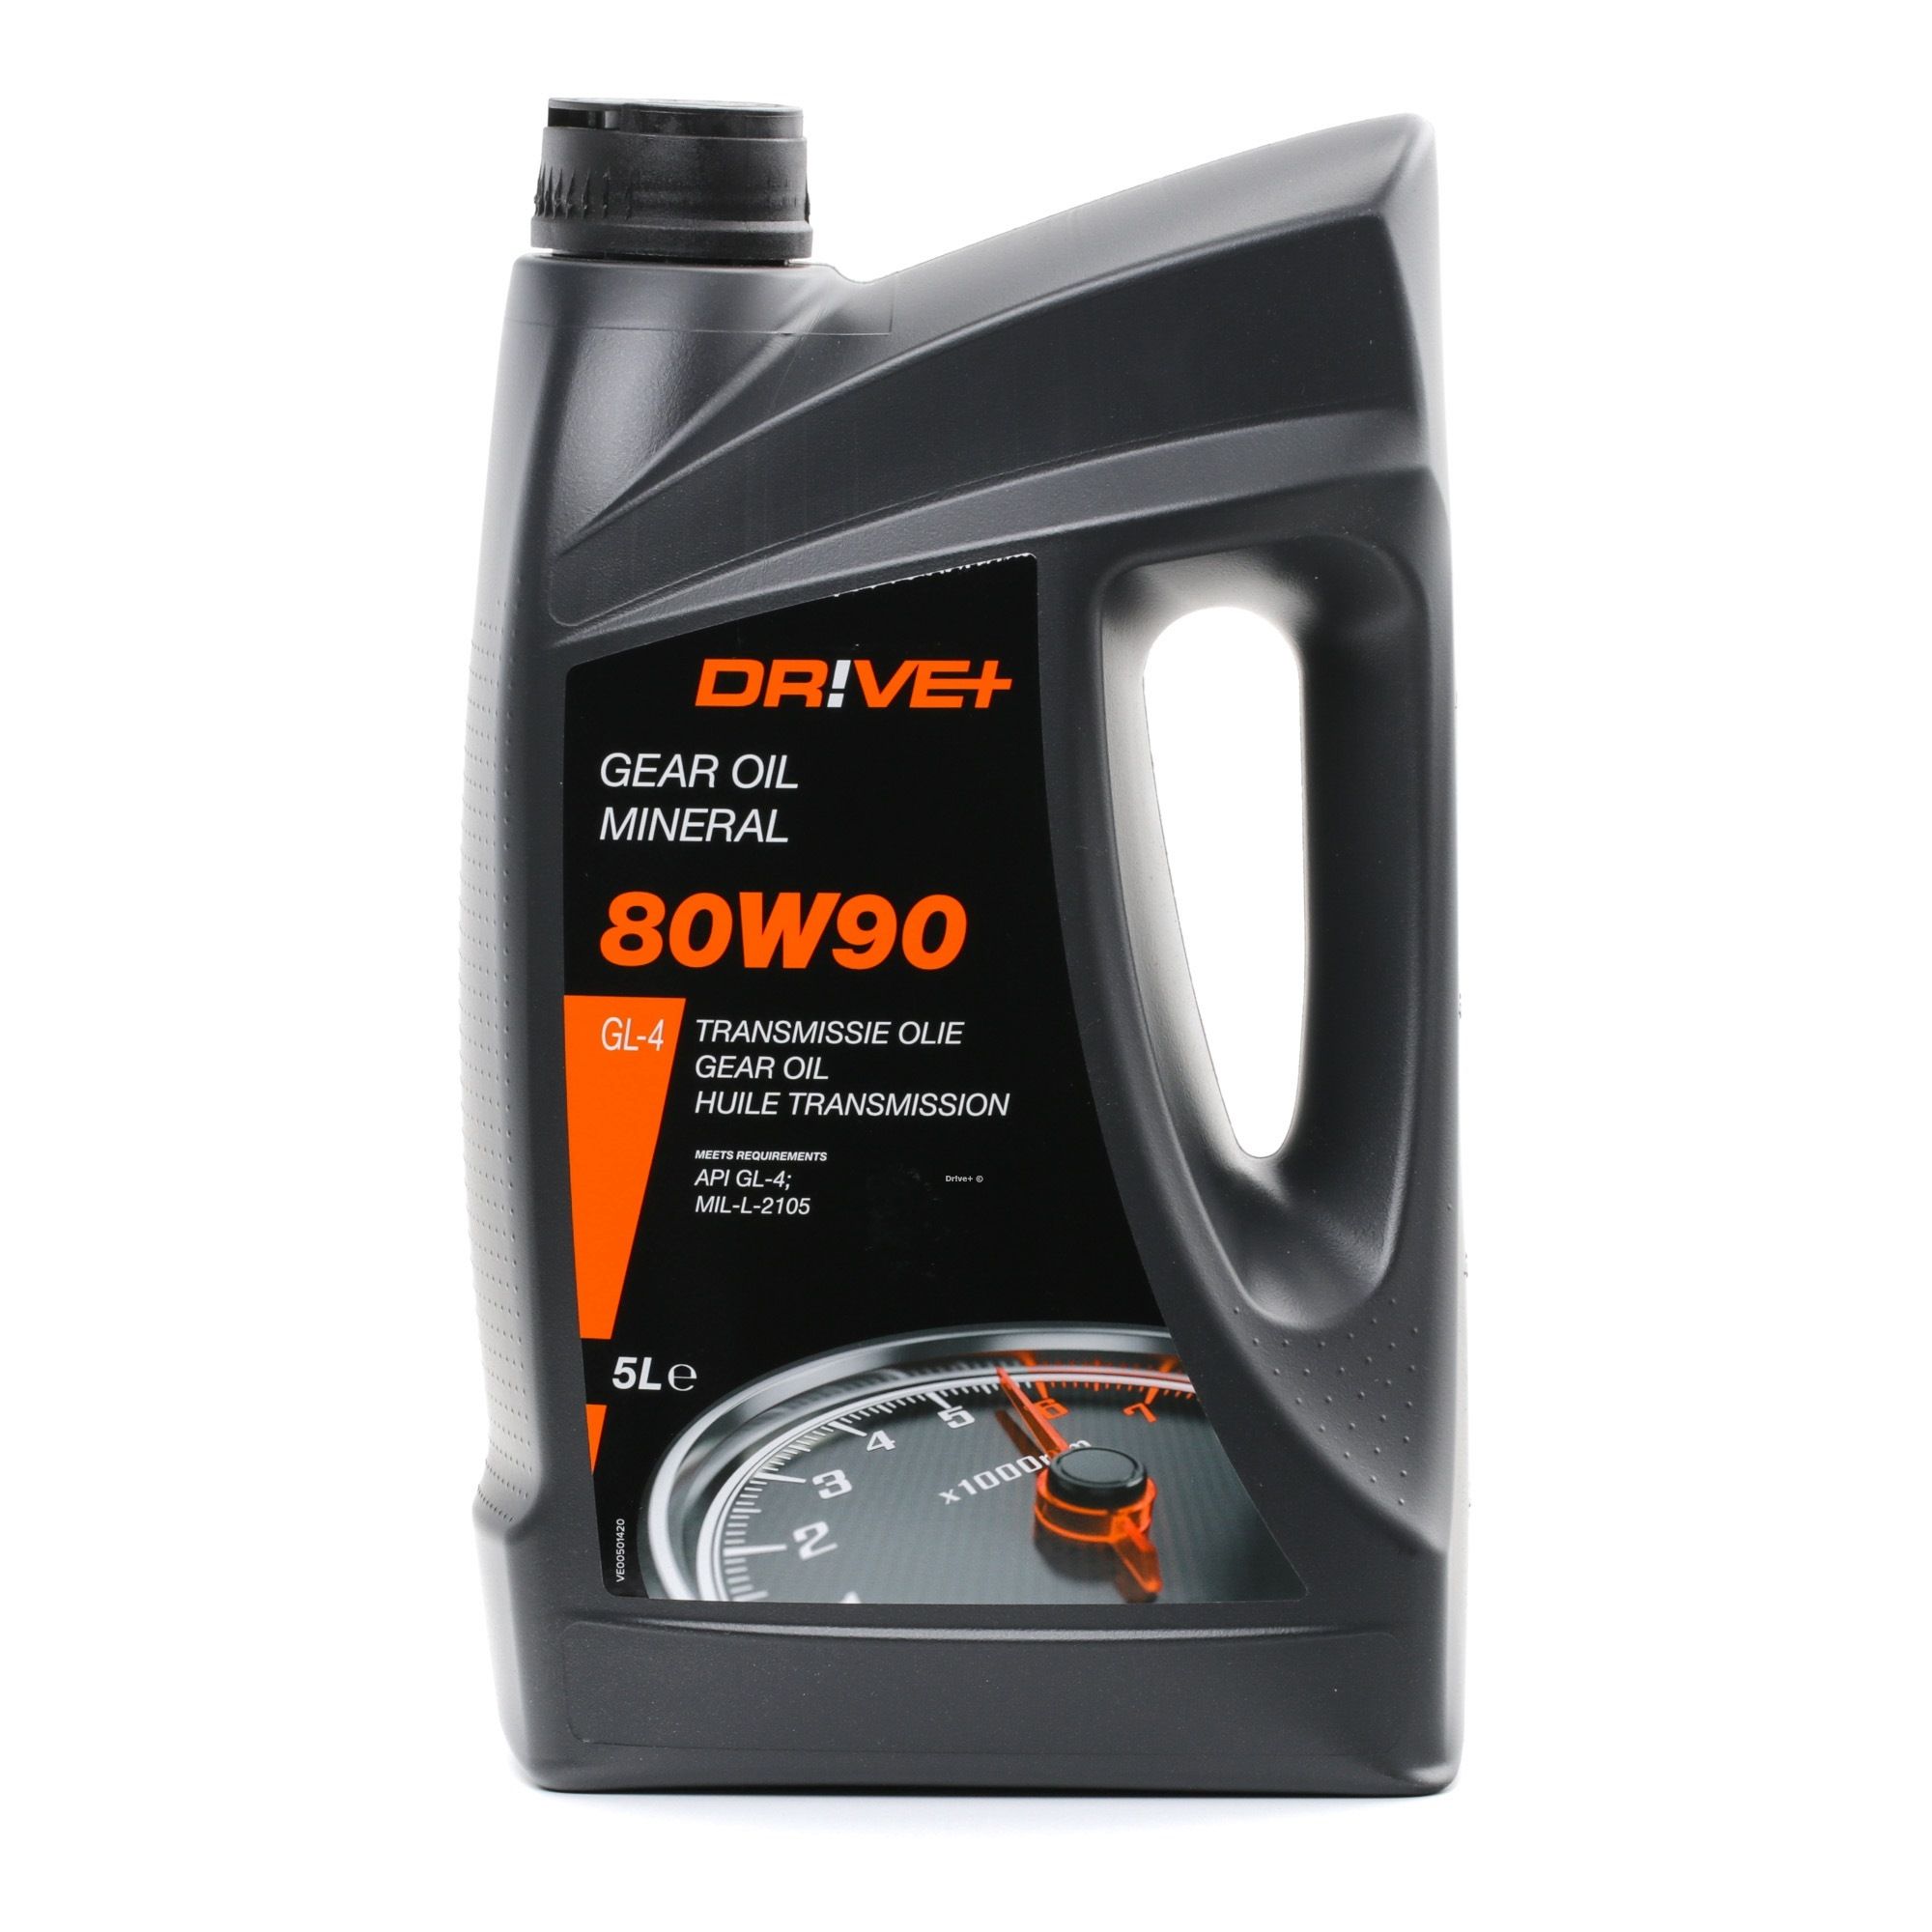 DP3310.10.068 Dr!ve+ Gearbox oil SAAB 80W-90, Capacity: 5l, Contains mineral oil